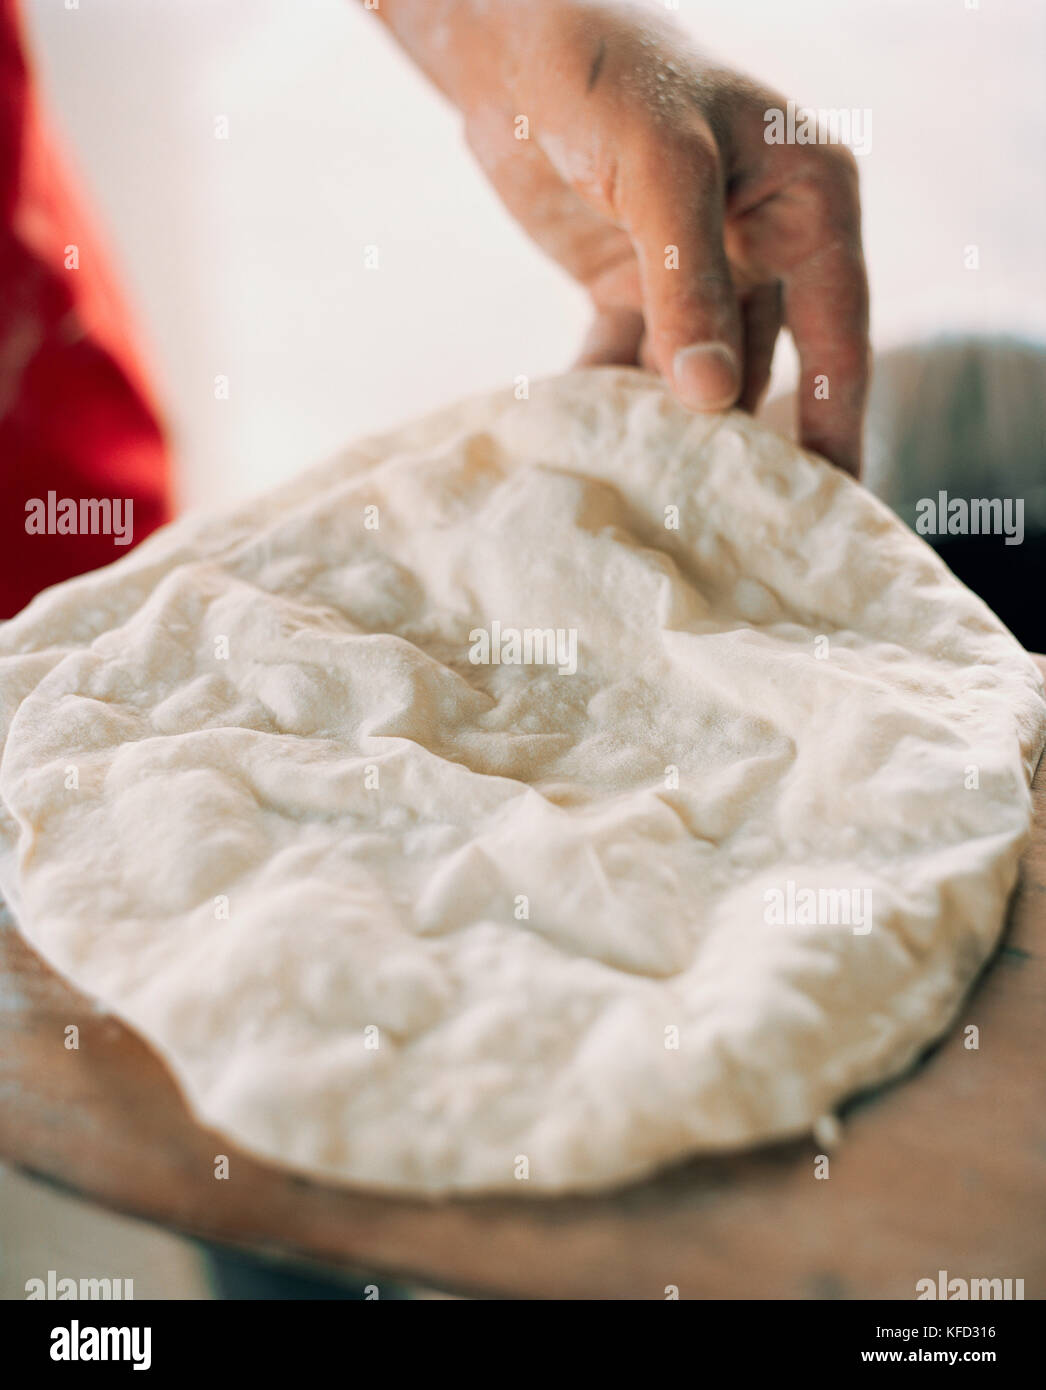 OMAN,  Muscat, person making flat bread, close-up Stock Photo